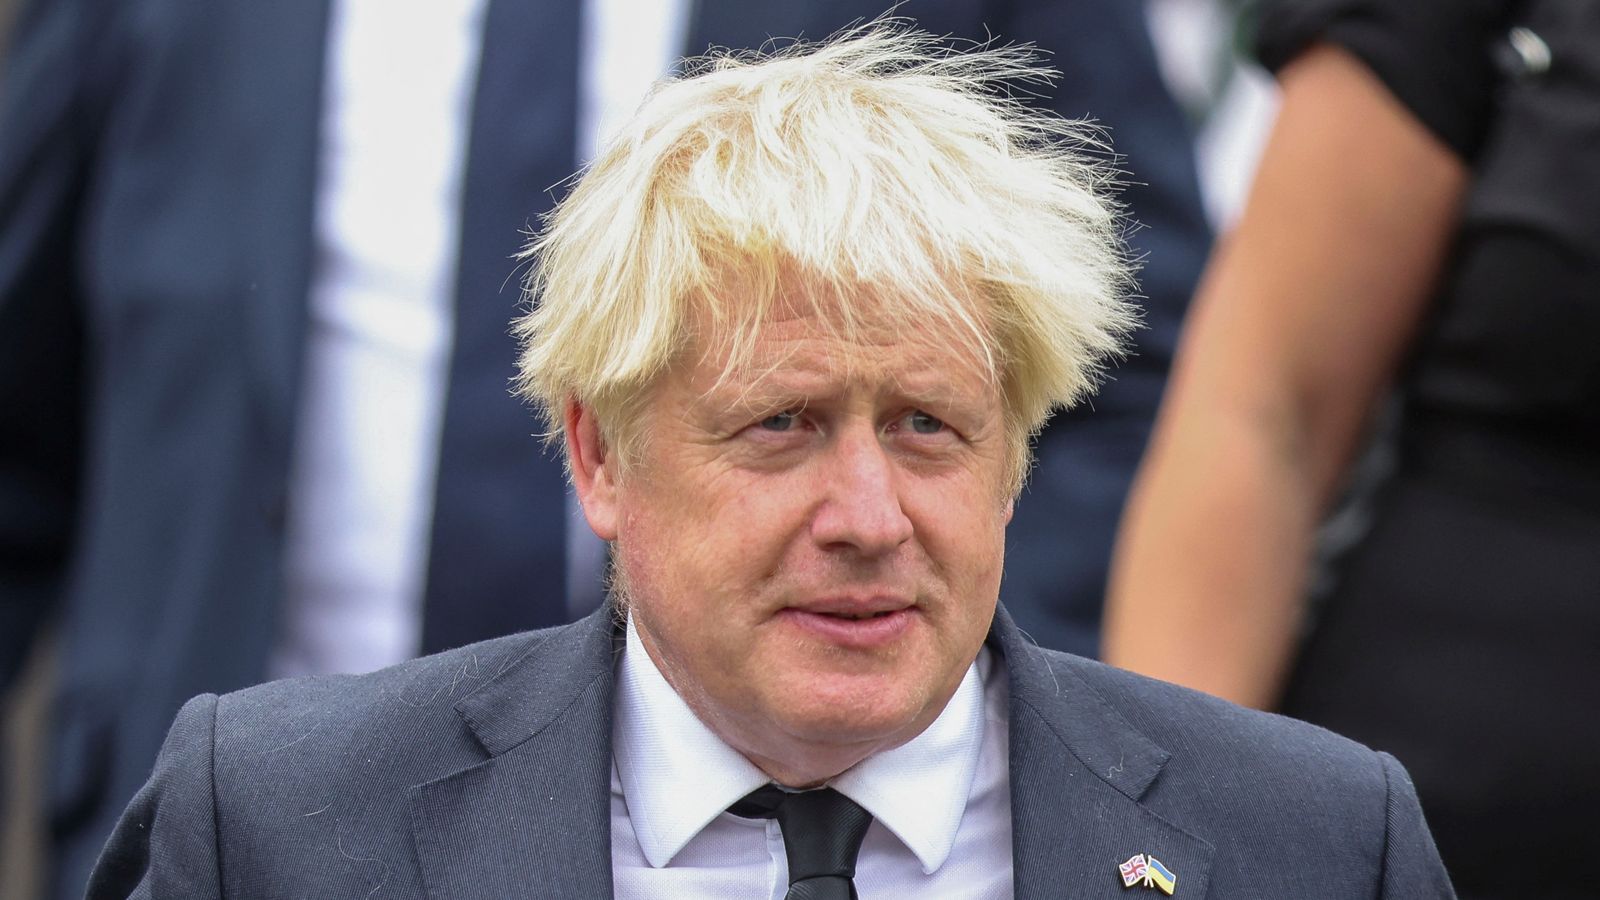 Boris Johnson earns £1m from speaking engagements since leaving Downing Street